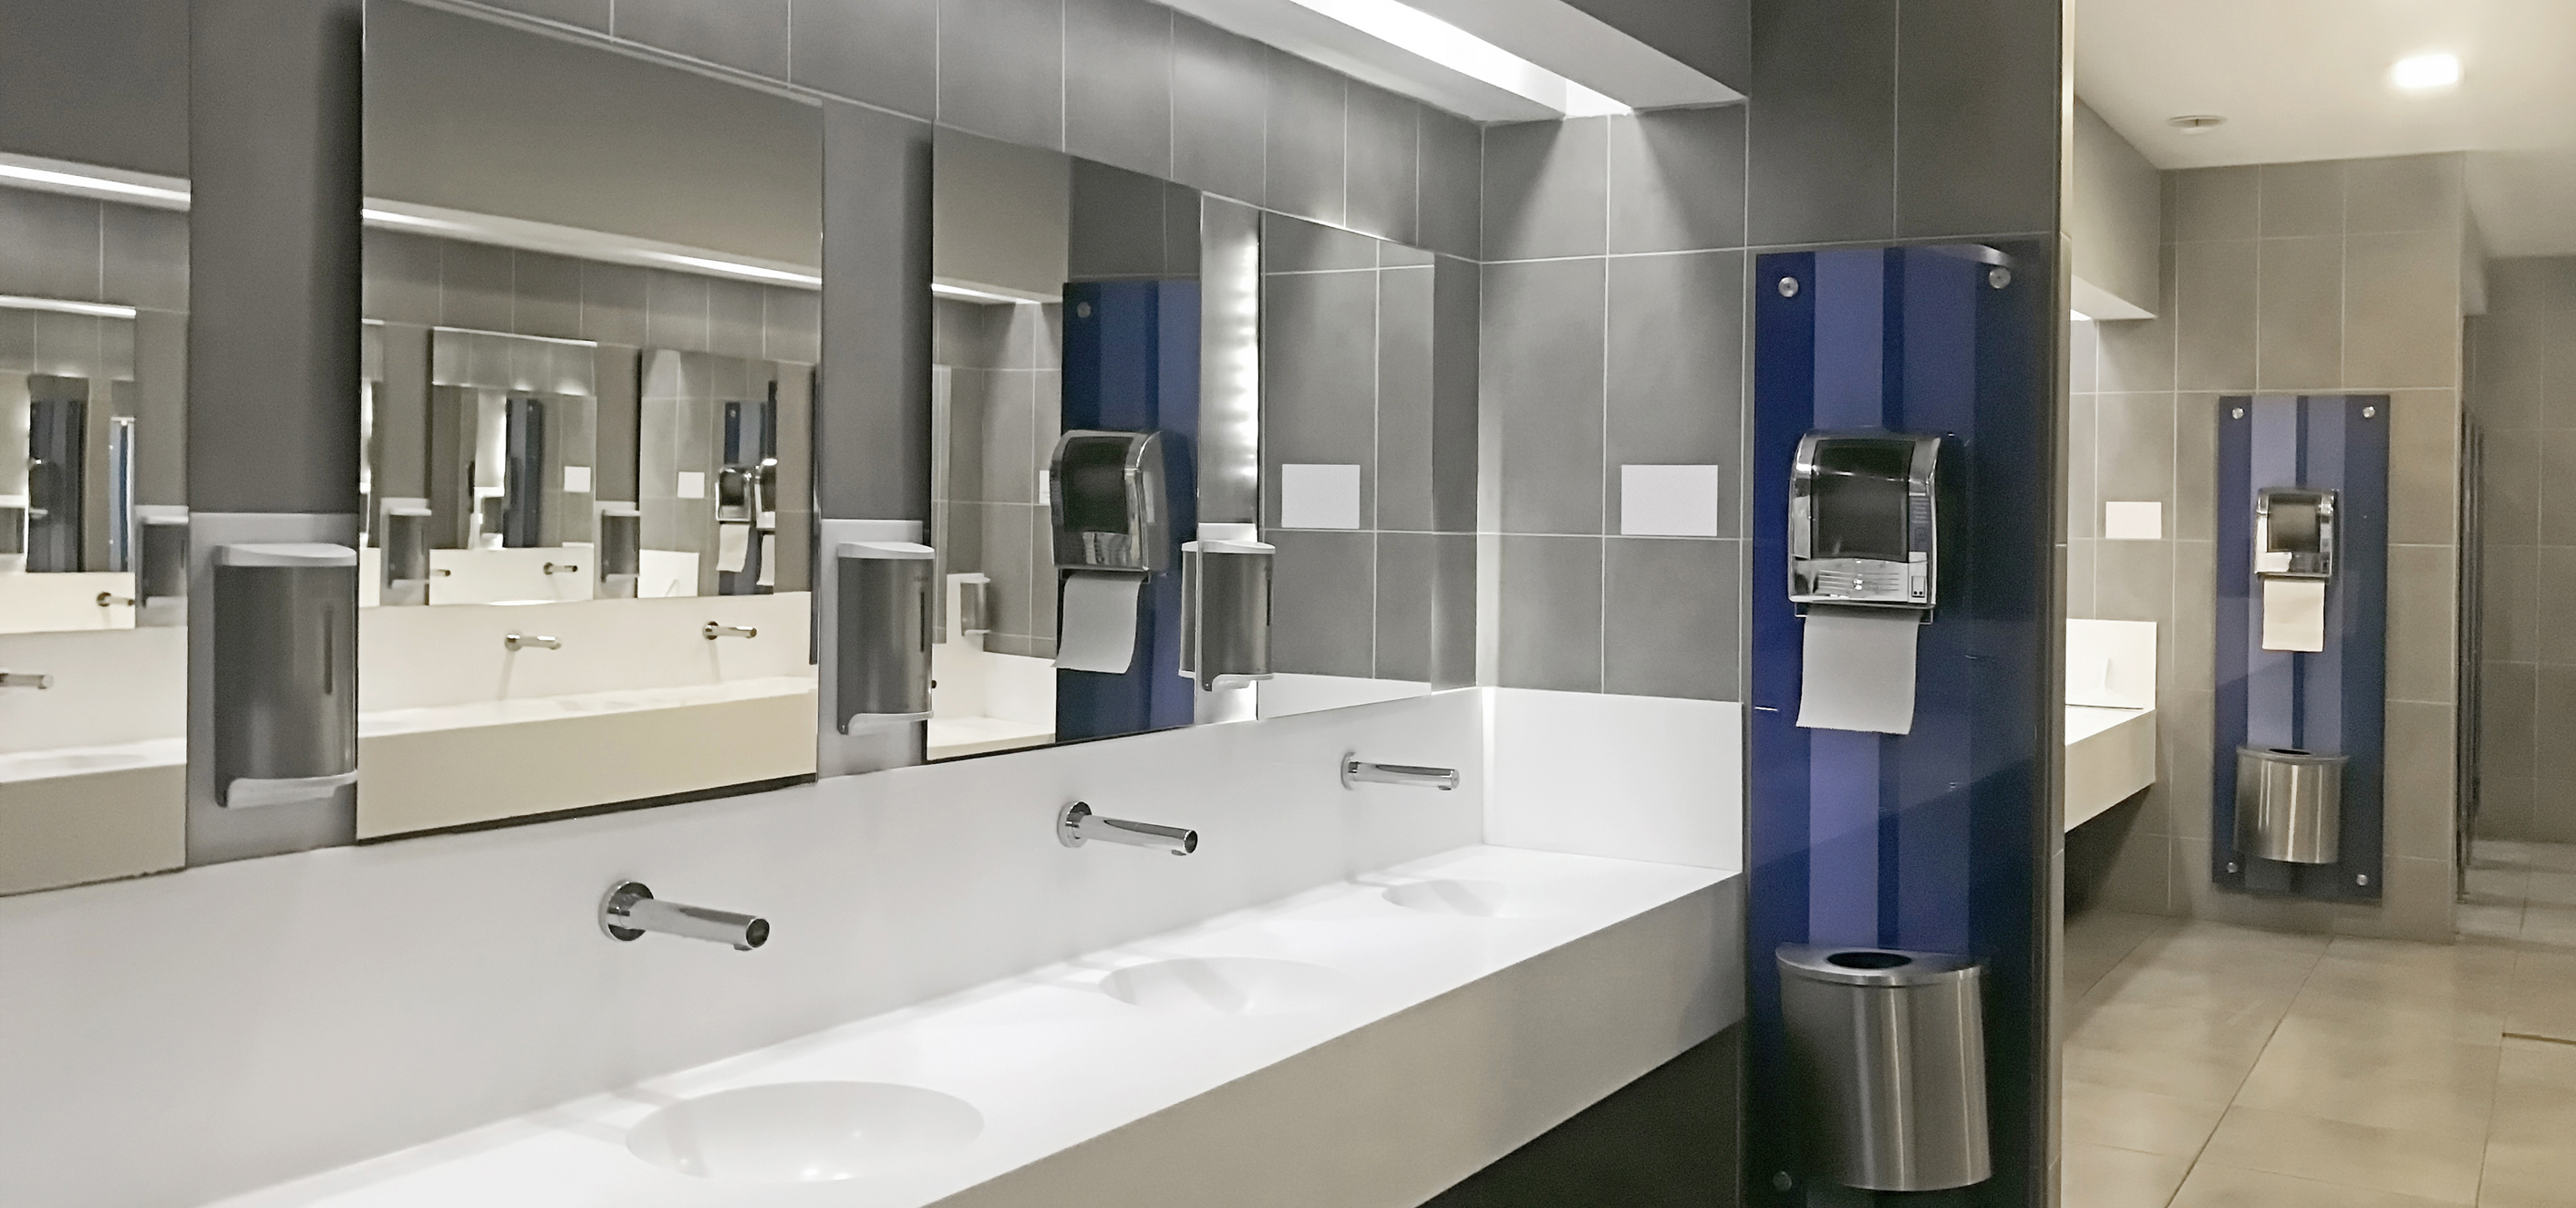 Wide angle, perspective view of public restroom in which the mirrors shown reflect mirrors on the opposite side creating an optical illusion. The image contains many commercial bathroom accessories such as soap dispensers, mirrors, and paper towel dispensers with built in waste receptacles.